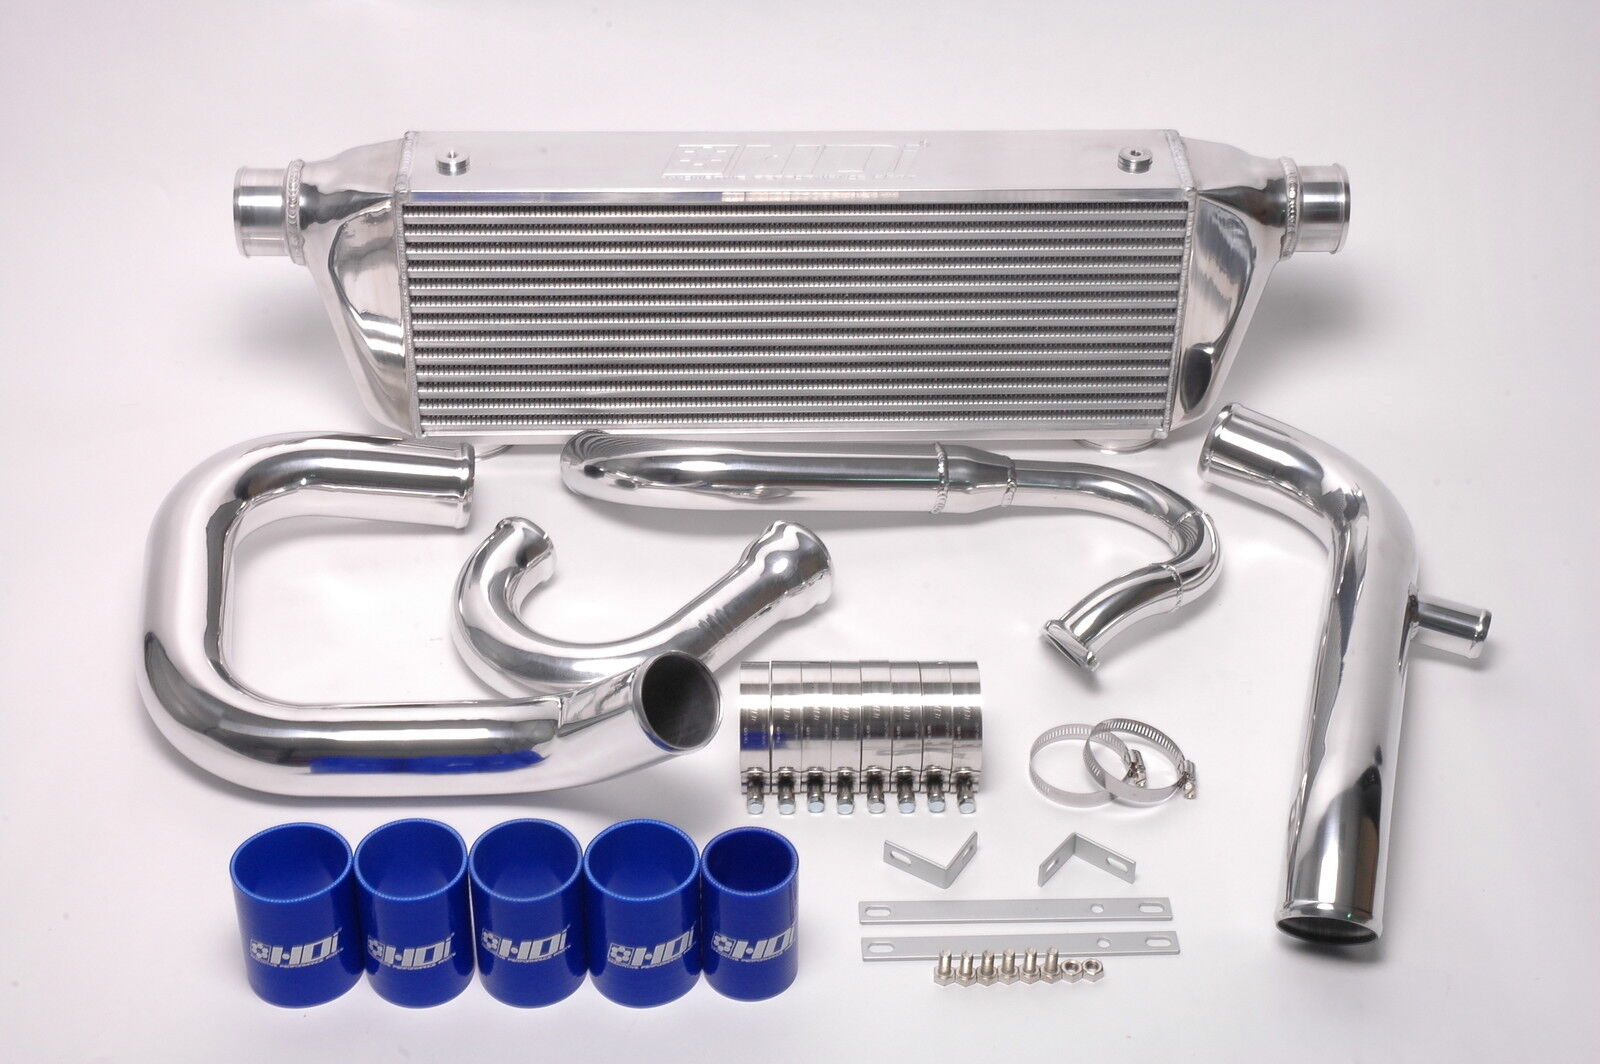 HDI HYBRID X01-R FRONT MOUNT INTERCOOLER KIT SUITS STARLET GLANZA EP91/EP82 -NEW